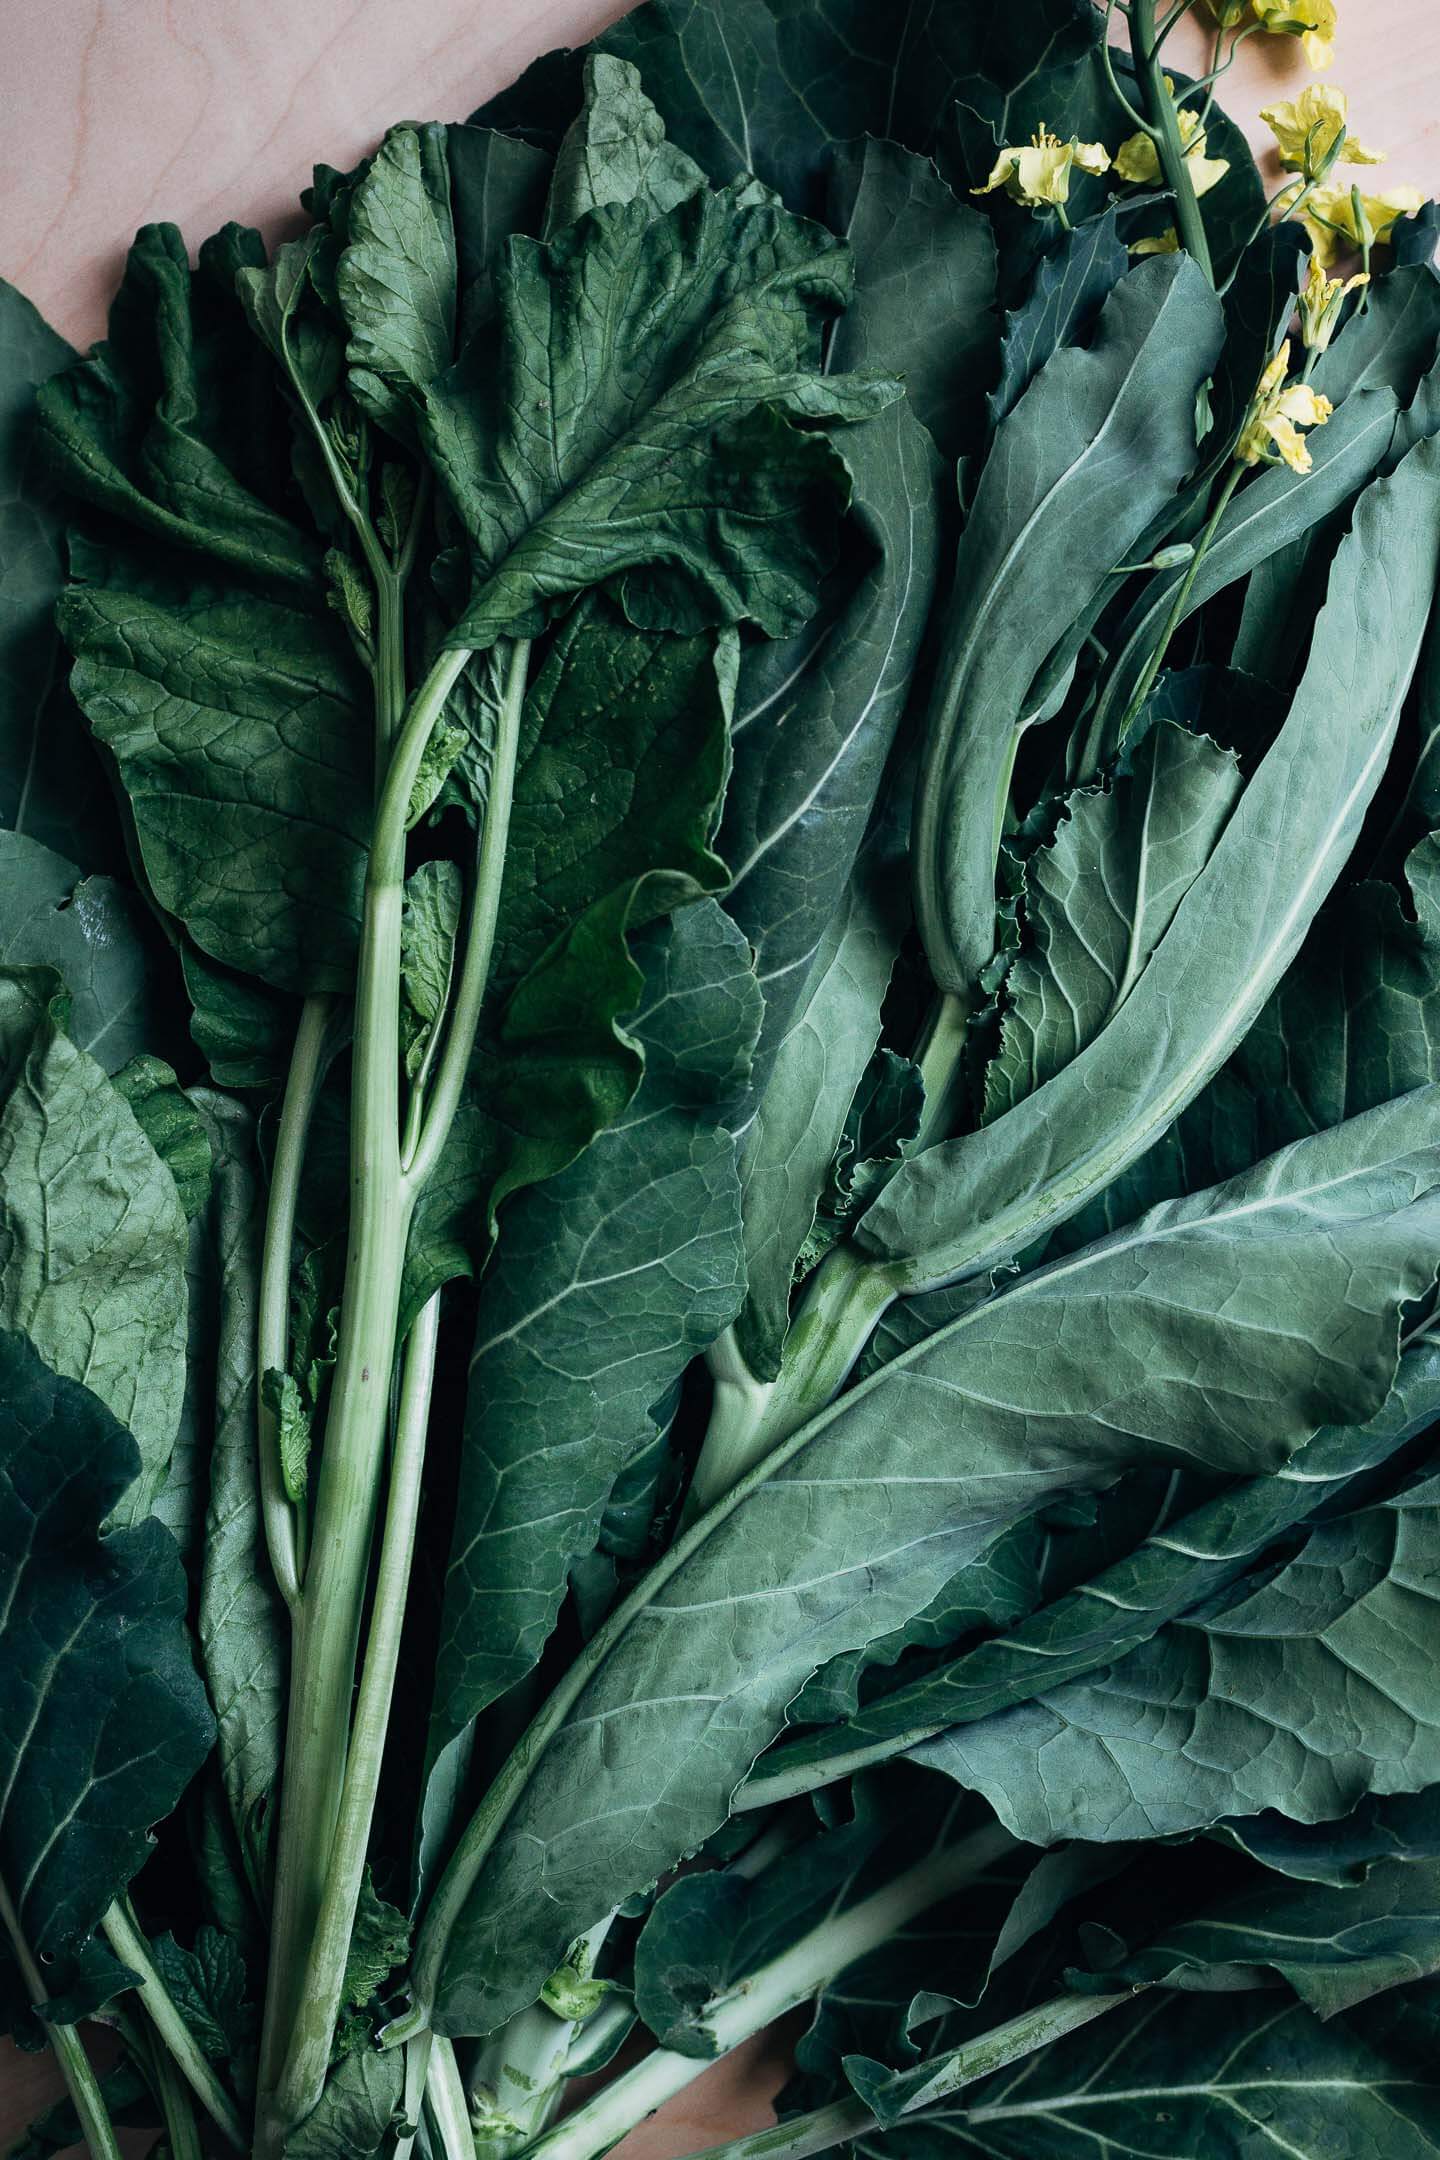 Collard and radish greens laid out on a table. 